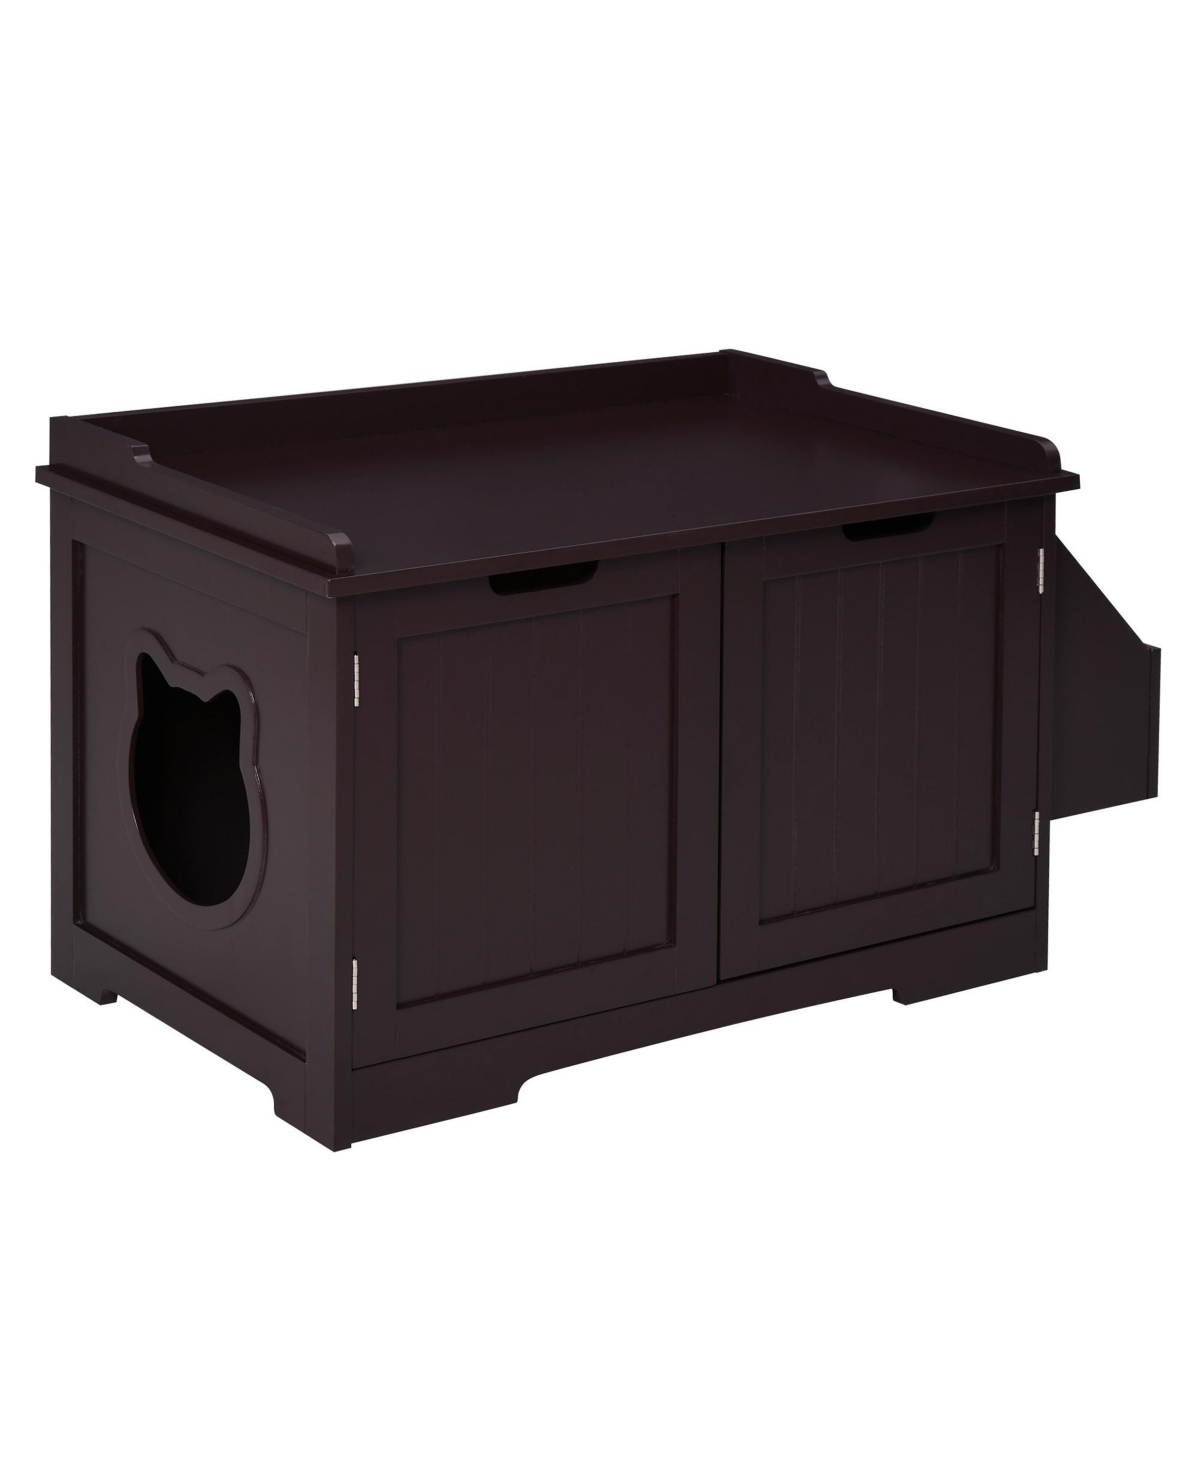 Wood Kitty Washroom Home with Tabletop and Storage Rack - Brown